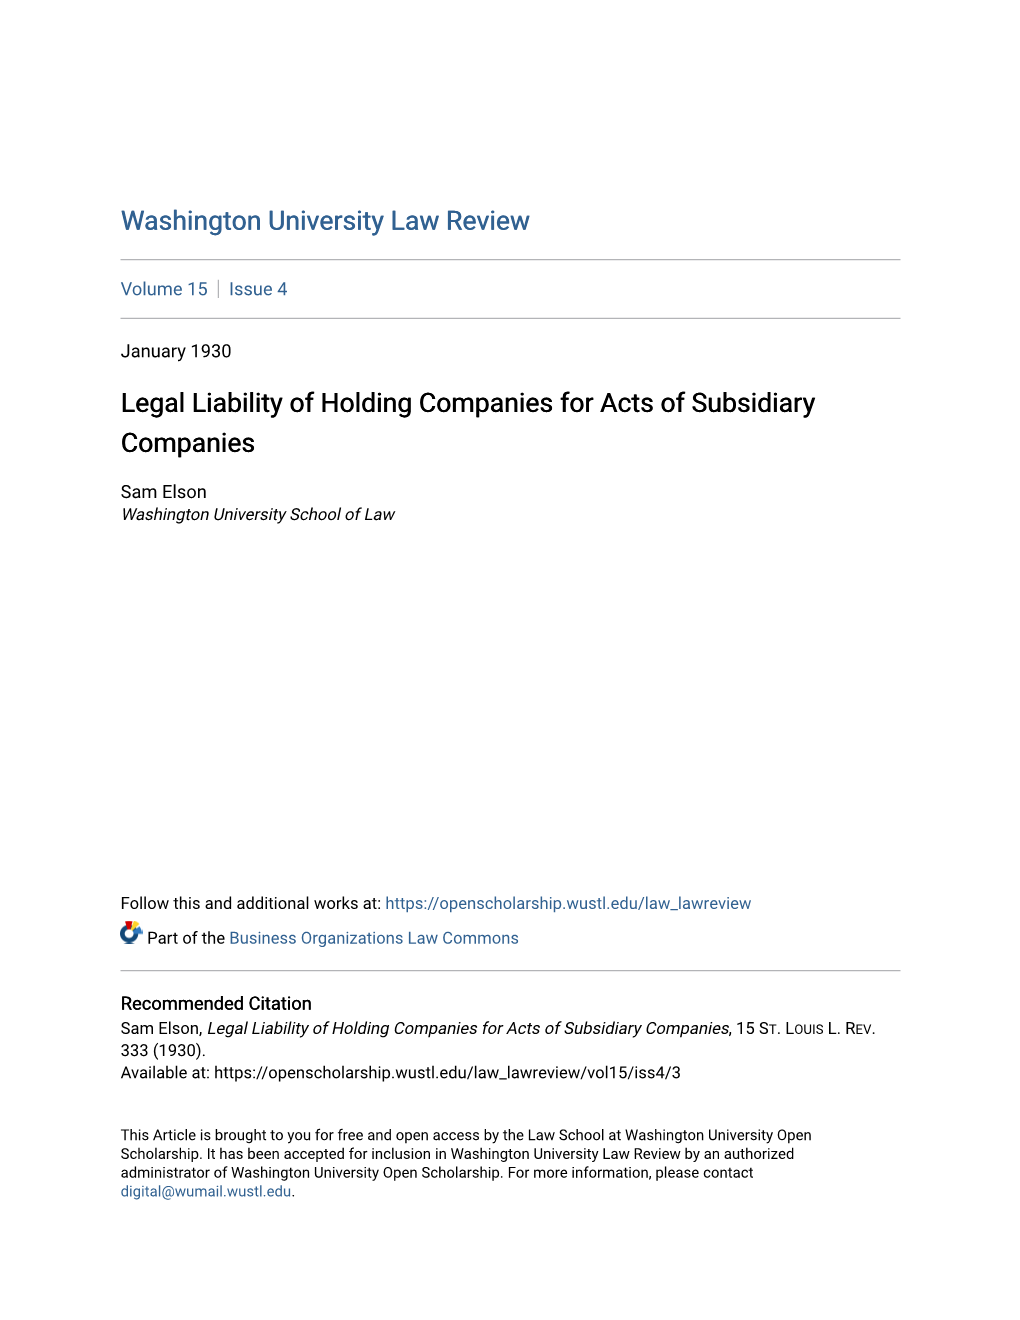 Legal Liability of Holding Companies for Acts of Subsidiary Companies